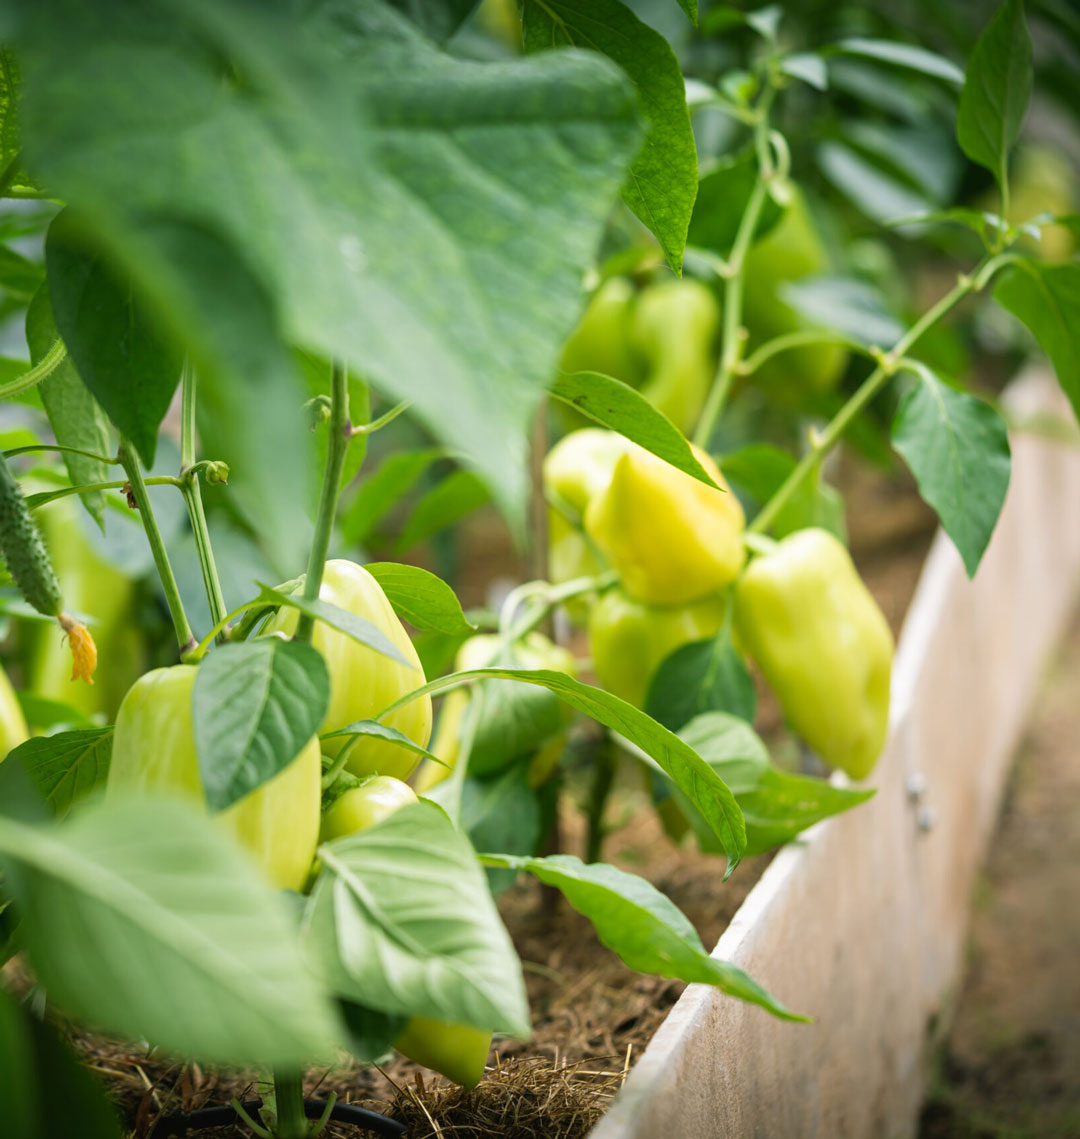 Growing Peppers in Edmonton - Tips and Tricks for a Bountiful Harvest